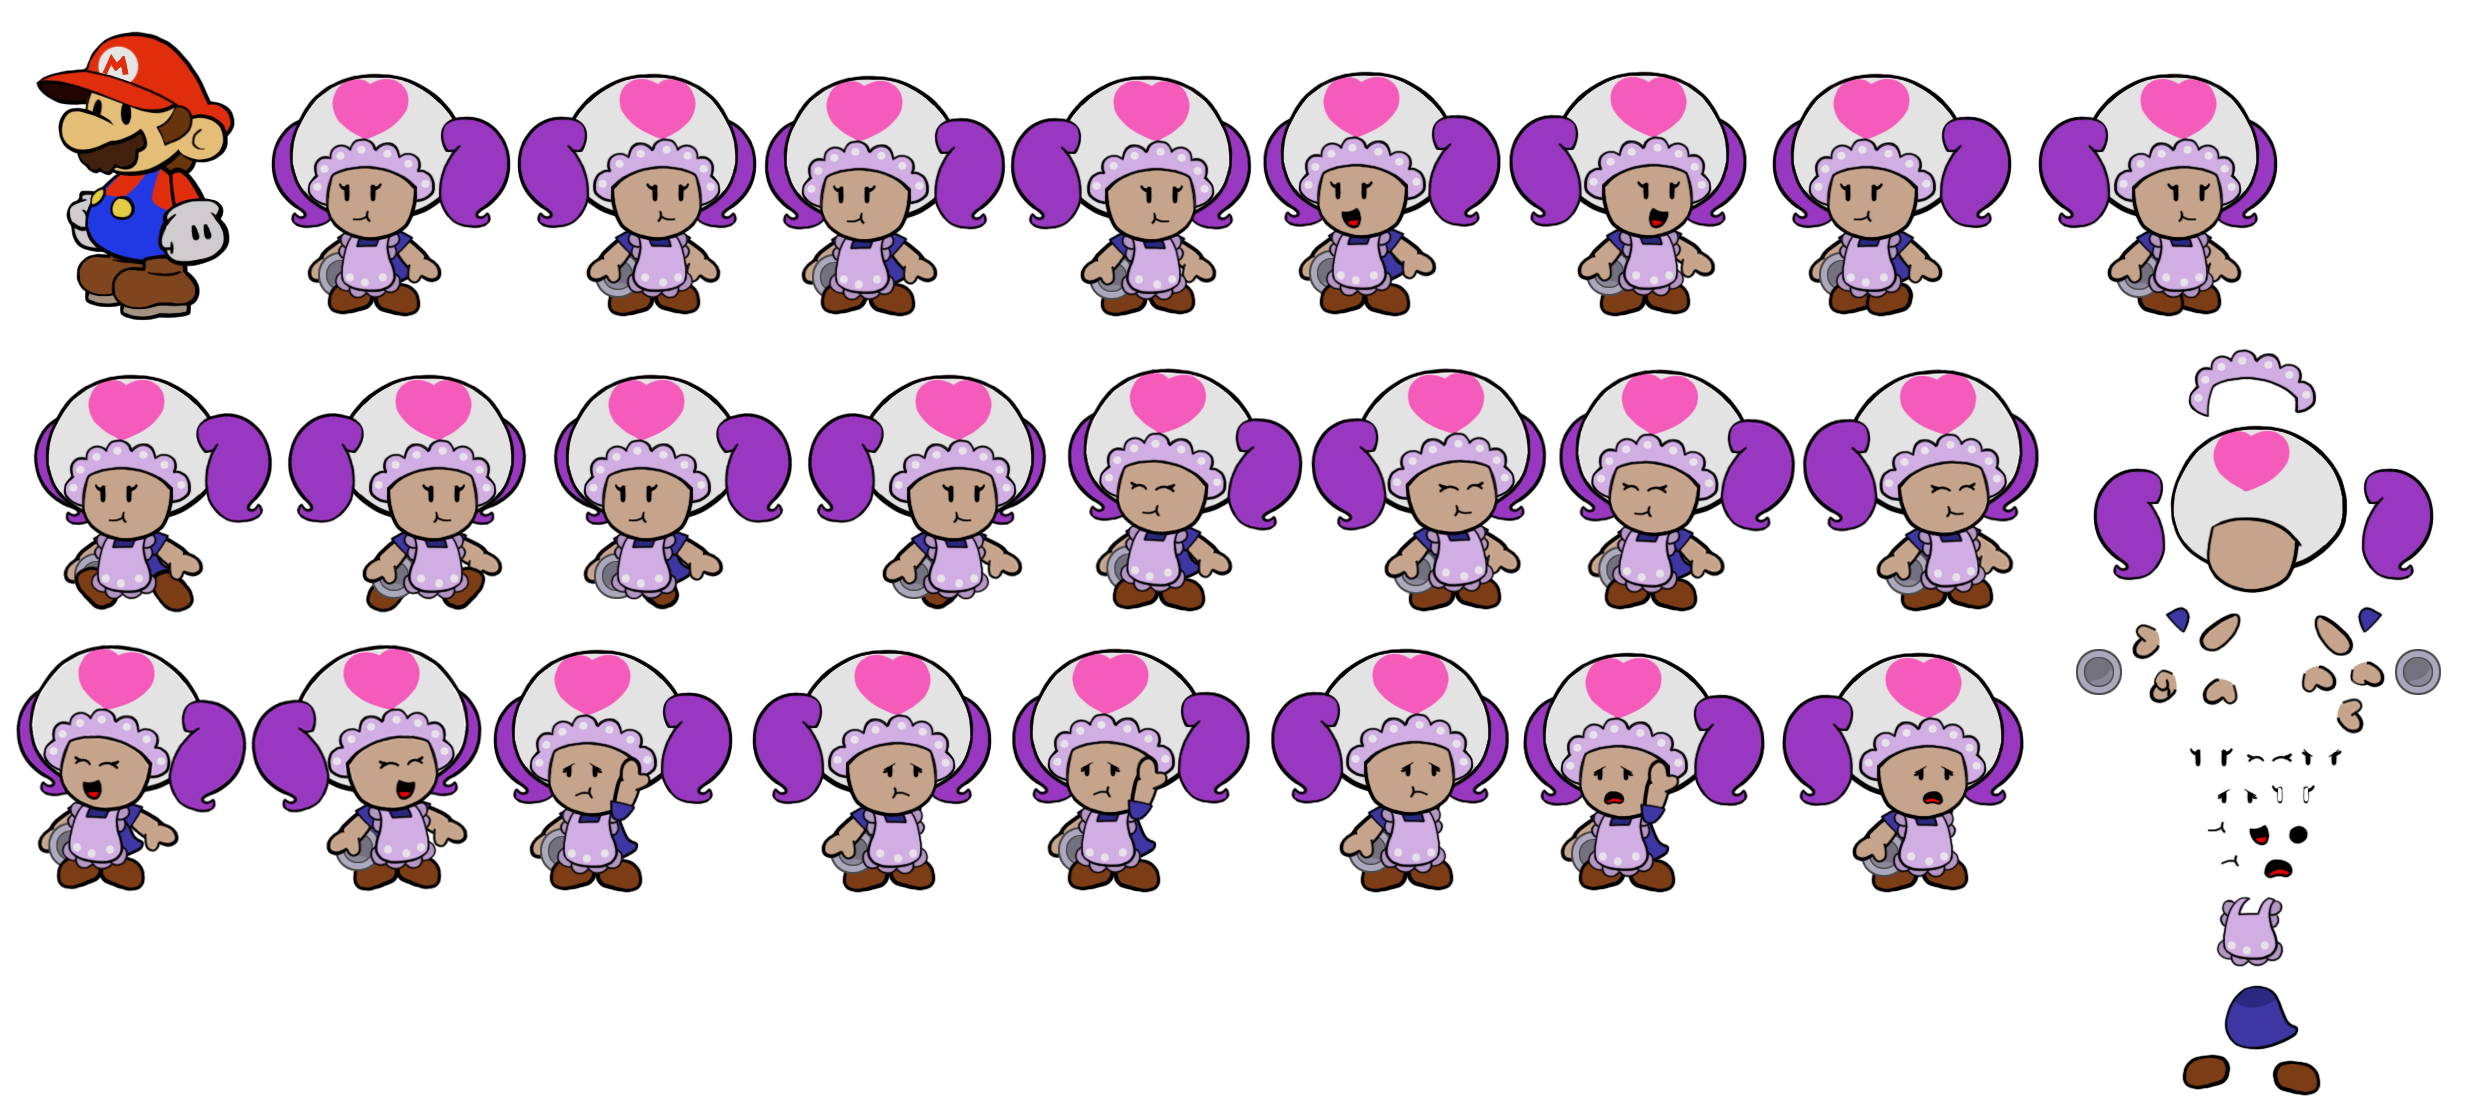 Waitress Toad (Paper Mario-Style)